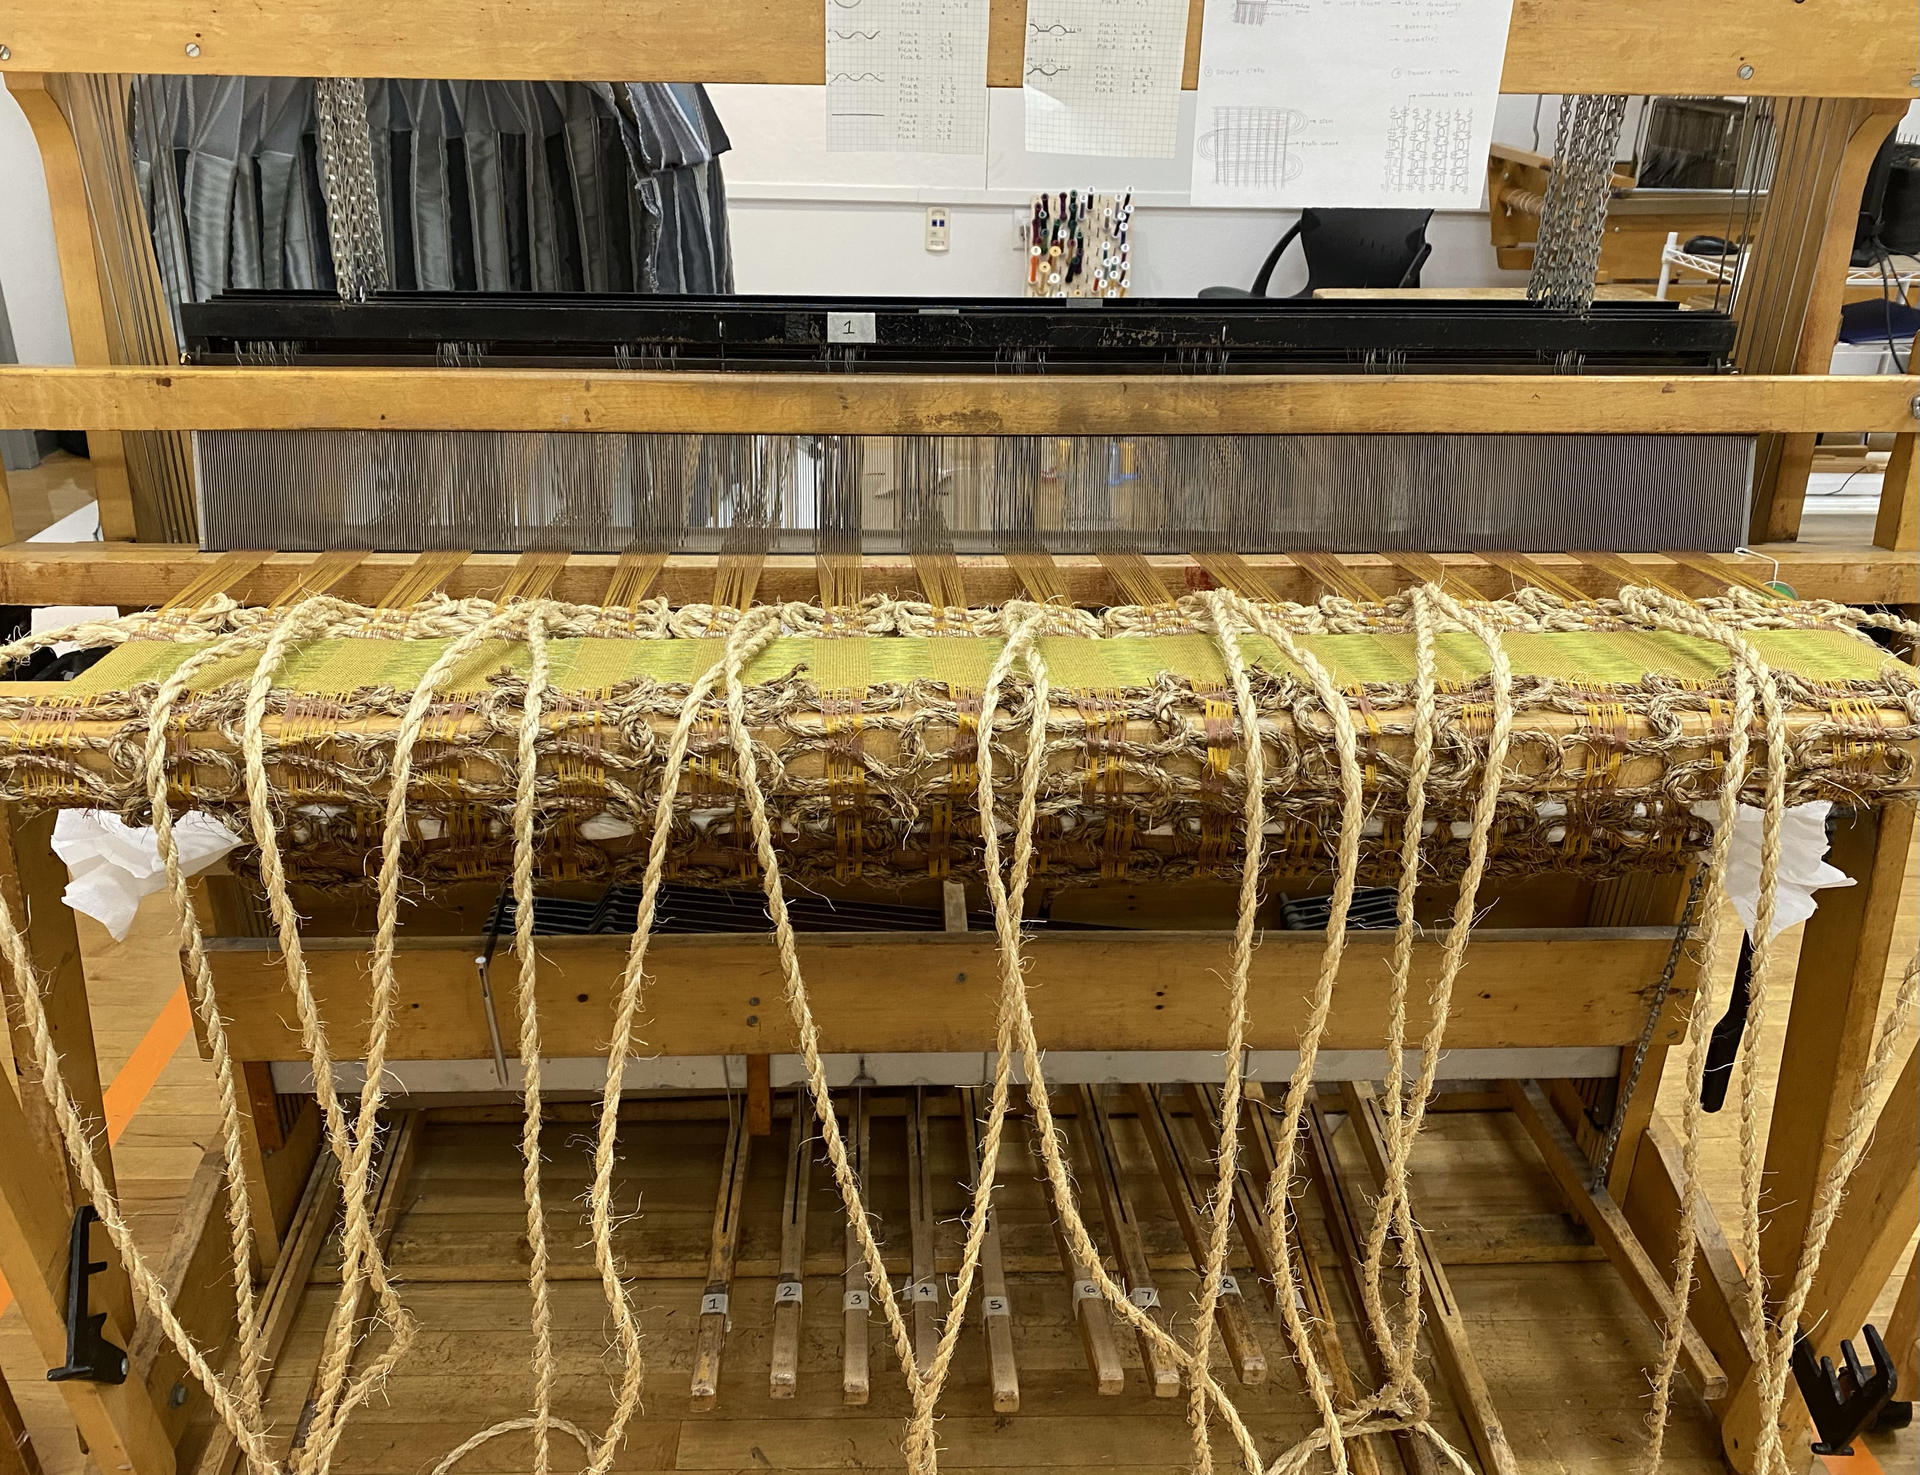 Image of the loom with handwoven piece on it